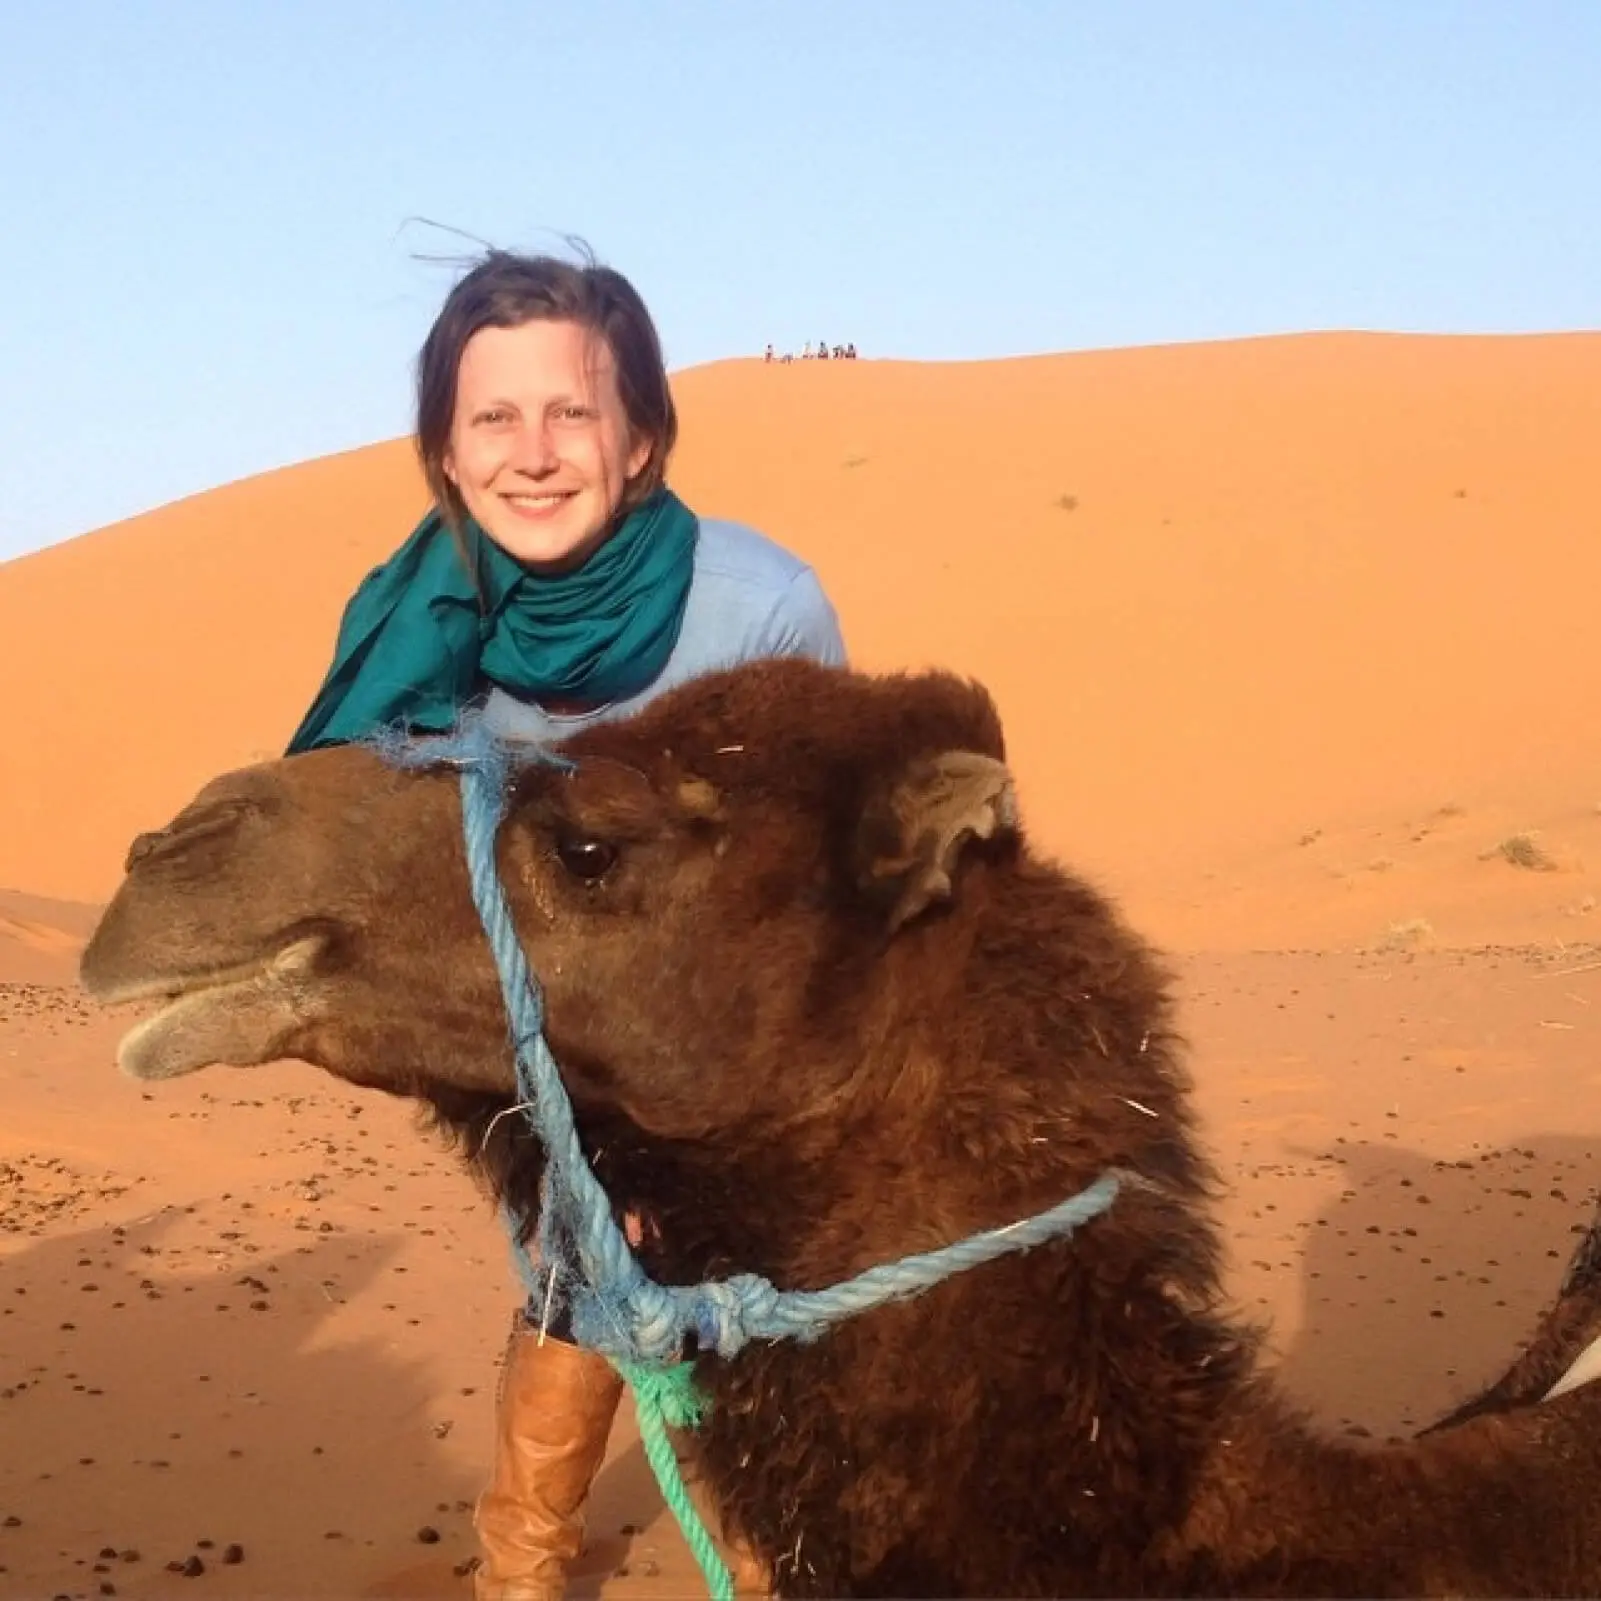 Fabric employee Sarah in Morocco, smiling by sand dunes with a camel.